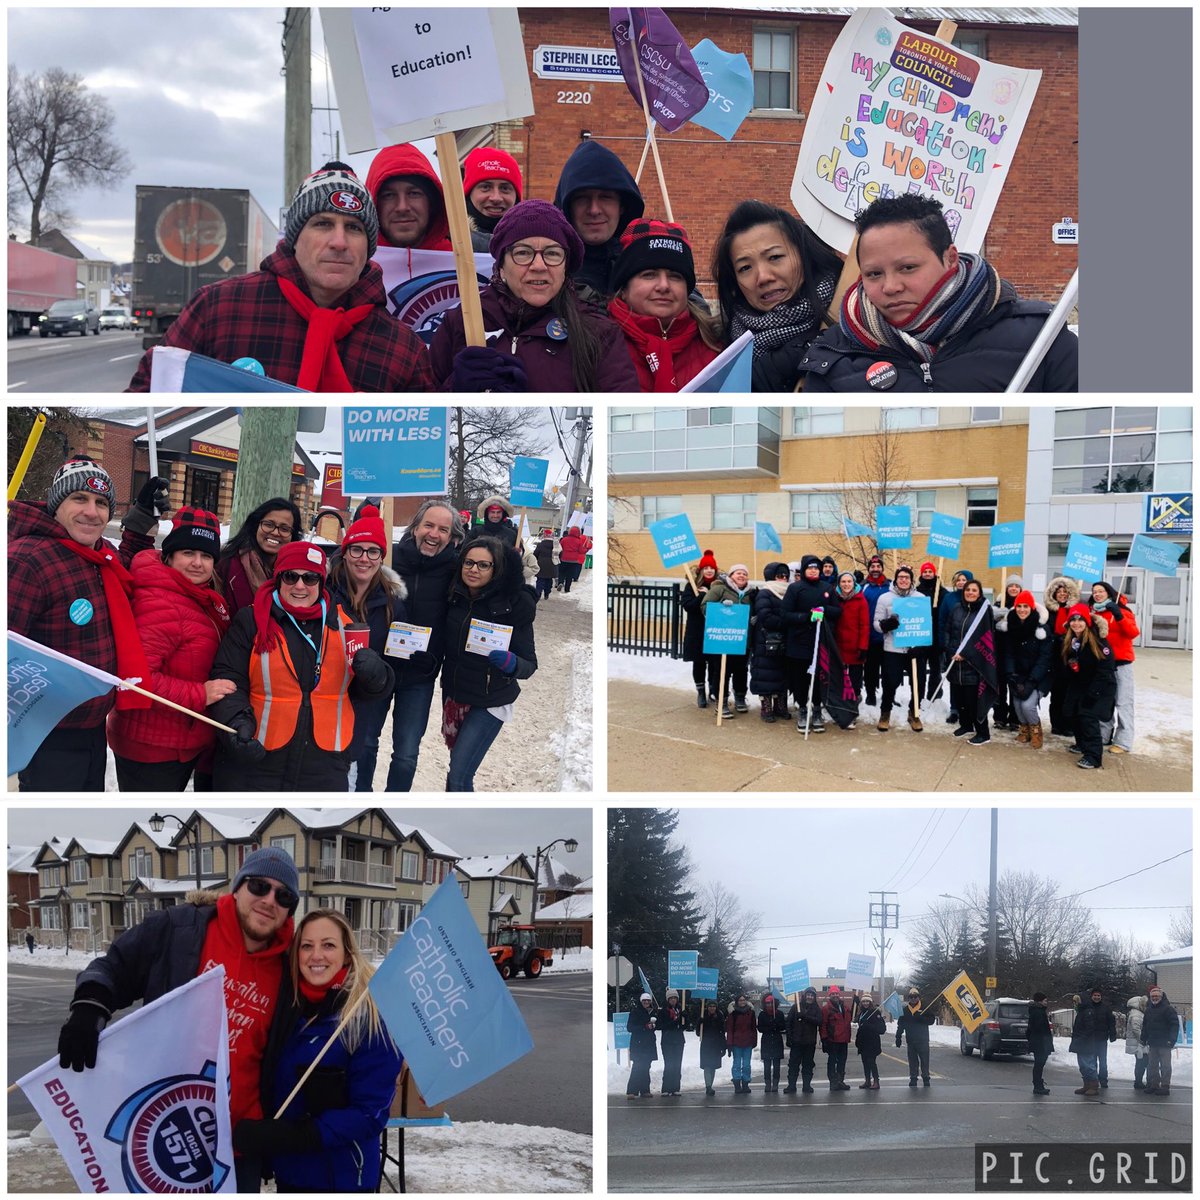 Overwhelming support from our union sisters & brothers at our picket lines👊🏽👊🏼👊
Many thanks to:
@CUPE905⁩
⁦@D16OSSTF⁩
⁦@torontolabour⁩ 
⁦@USWSTAC⁩ 
@CUPE2331
⁦@ETFOYRVP1DARREN⁩
#Cupe1571
⁦@OECTAProv⁩ 
⁦@OECTAprez⁩
#SolidarityForever